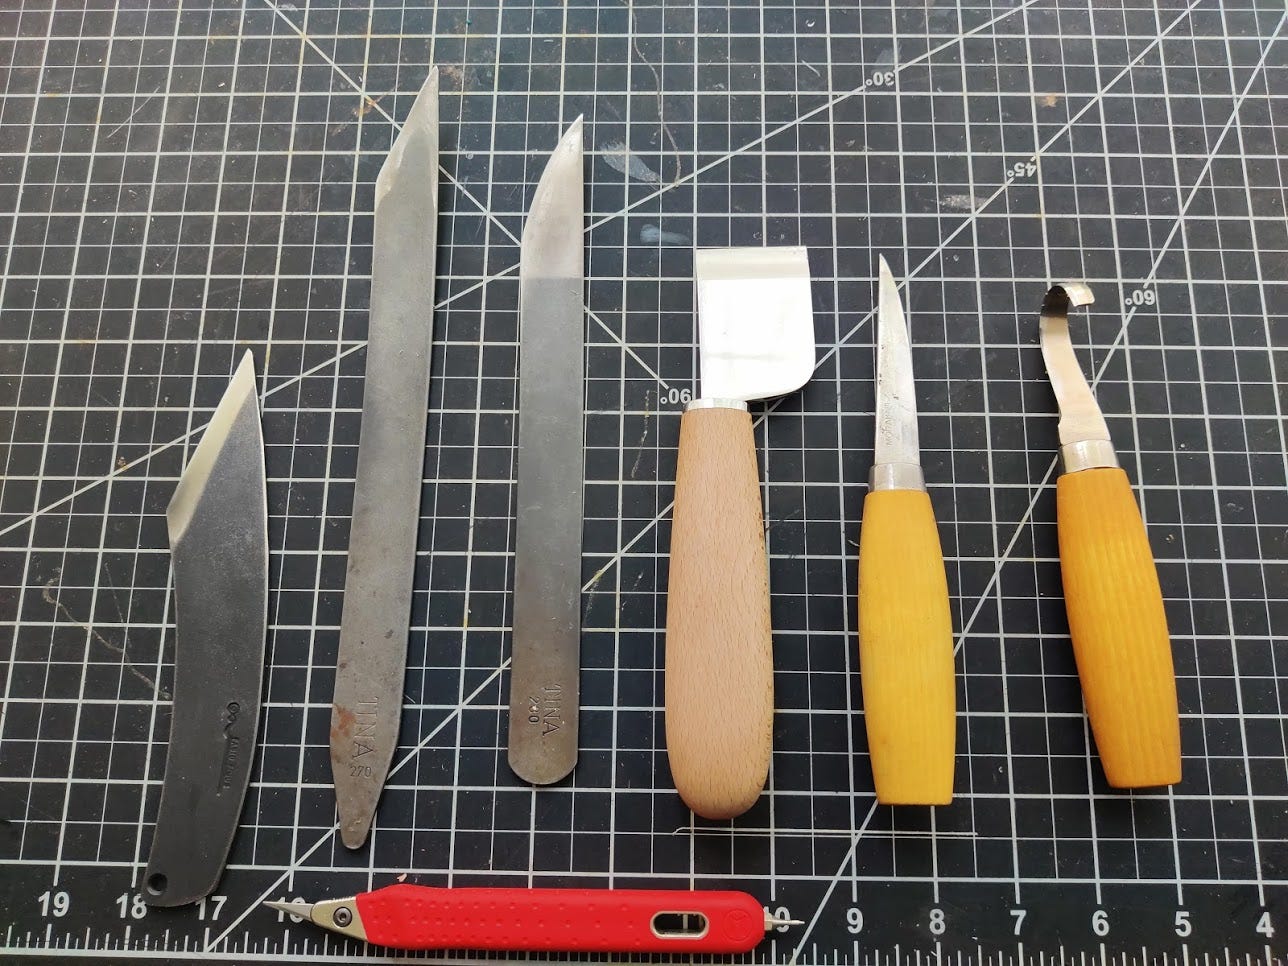 12 Quality Tools for the Leatherworker on a Budget (and one tool